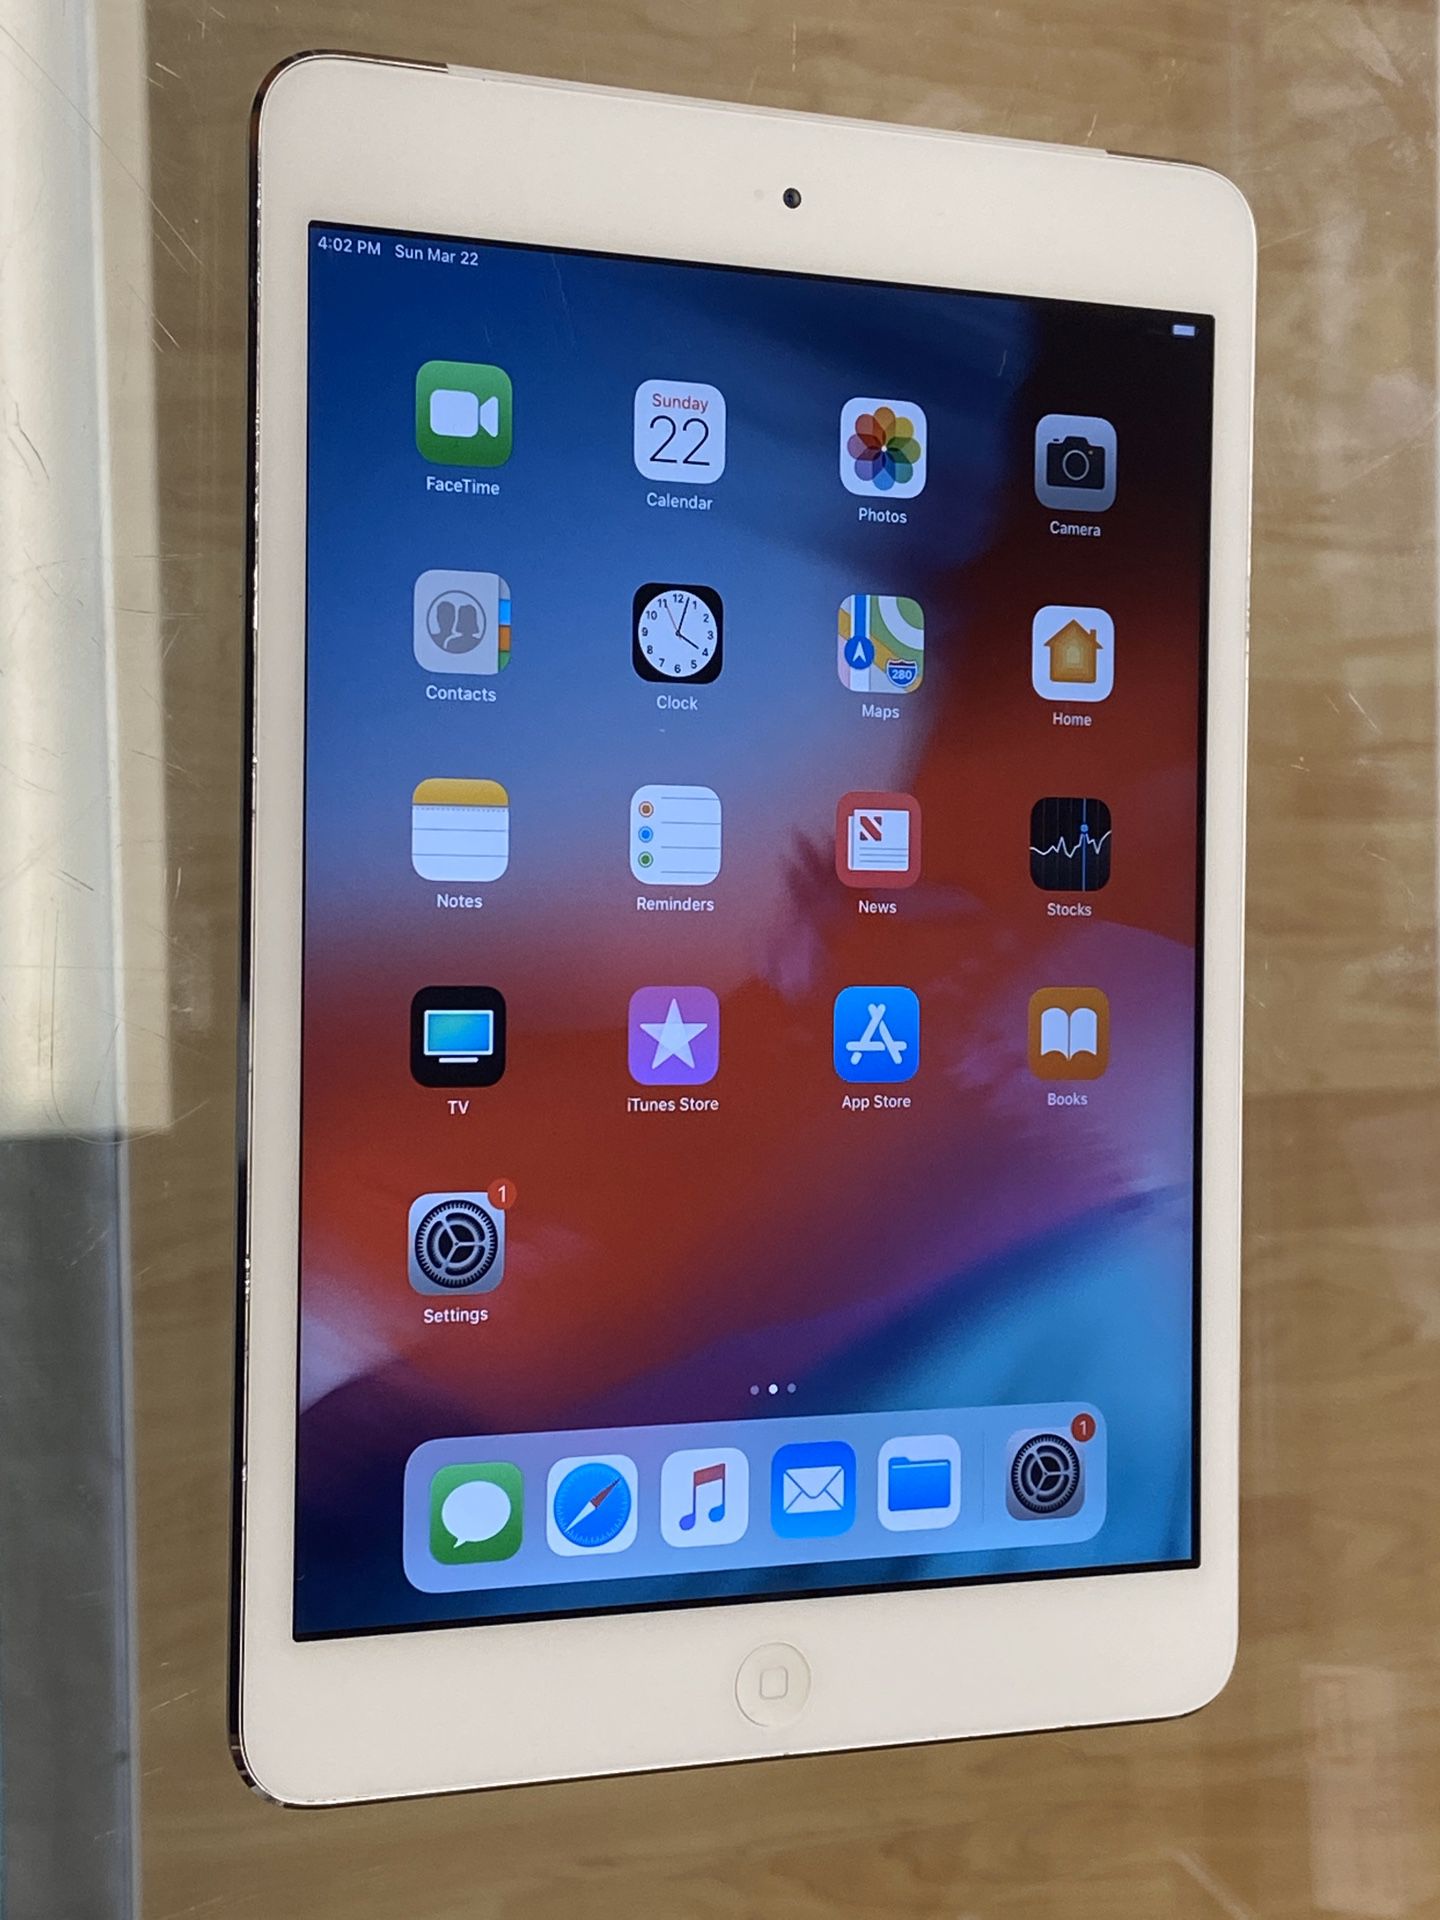 Unlocked Nice iPad Mini 2 Retina 64gb, White color. Cellular and WiFi. Excellent condition. Charger included. Very nice. Works perfect, everything wo